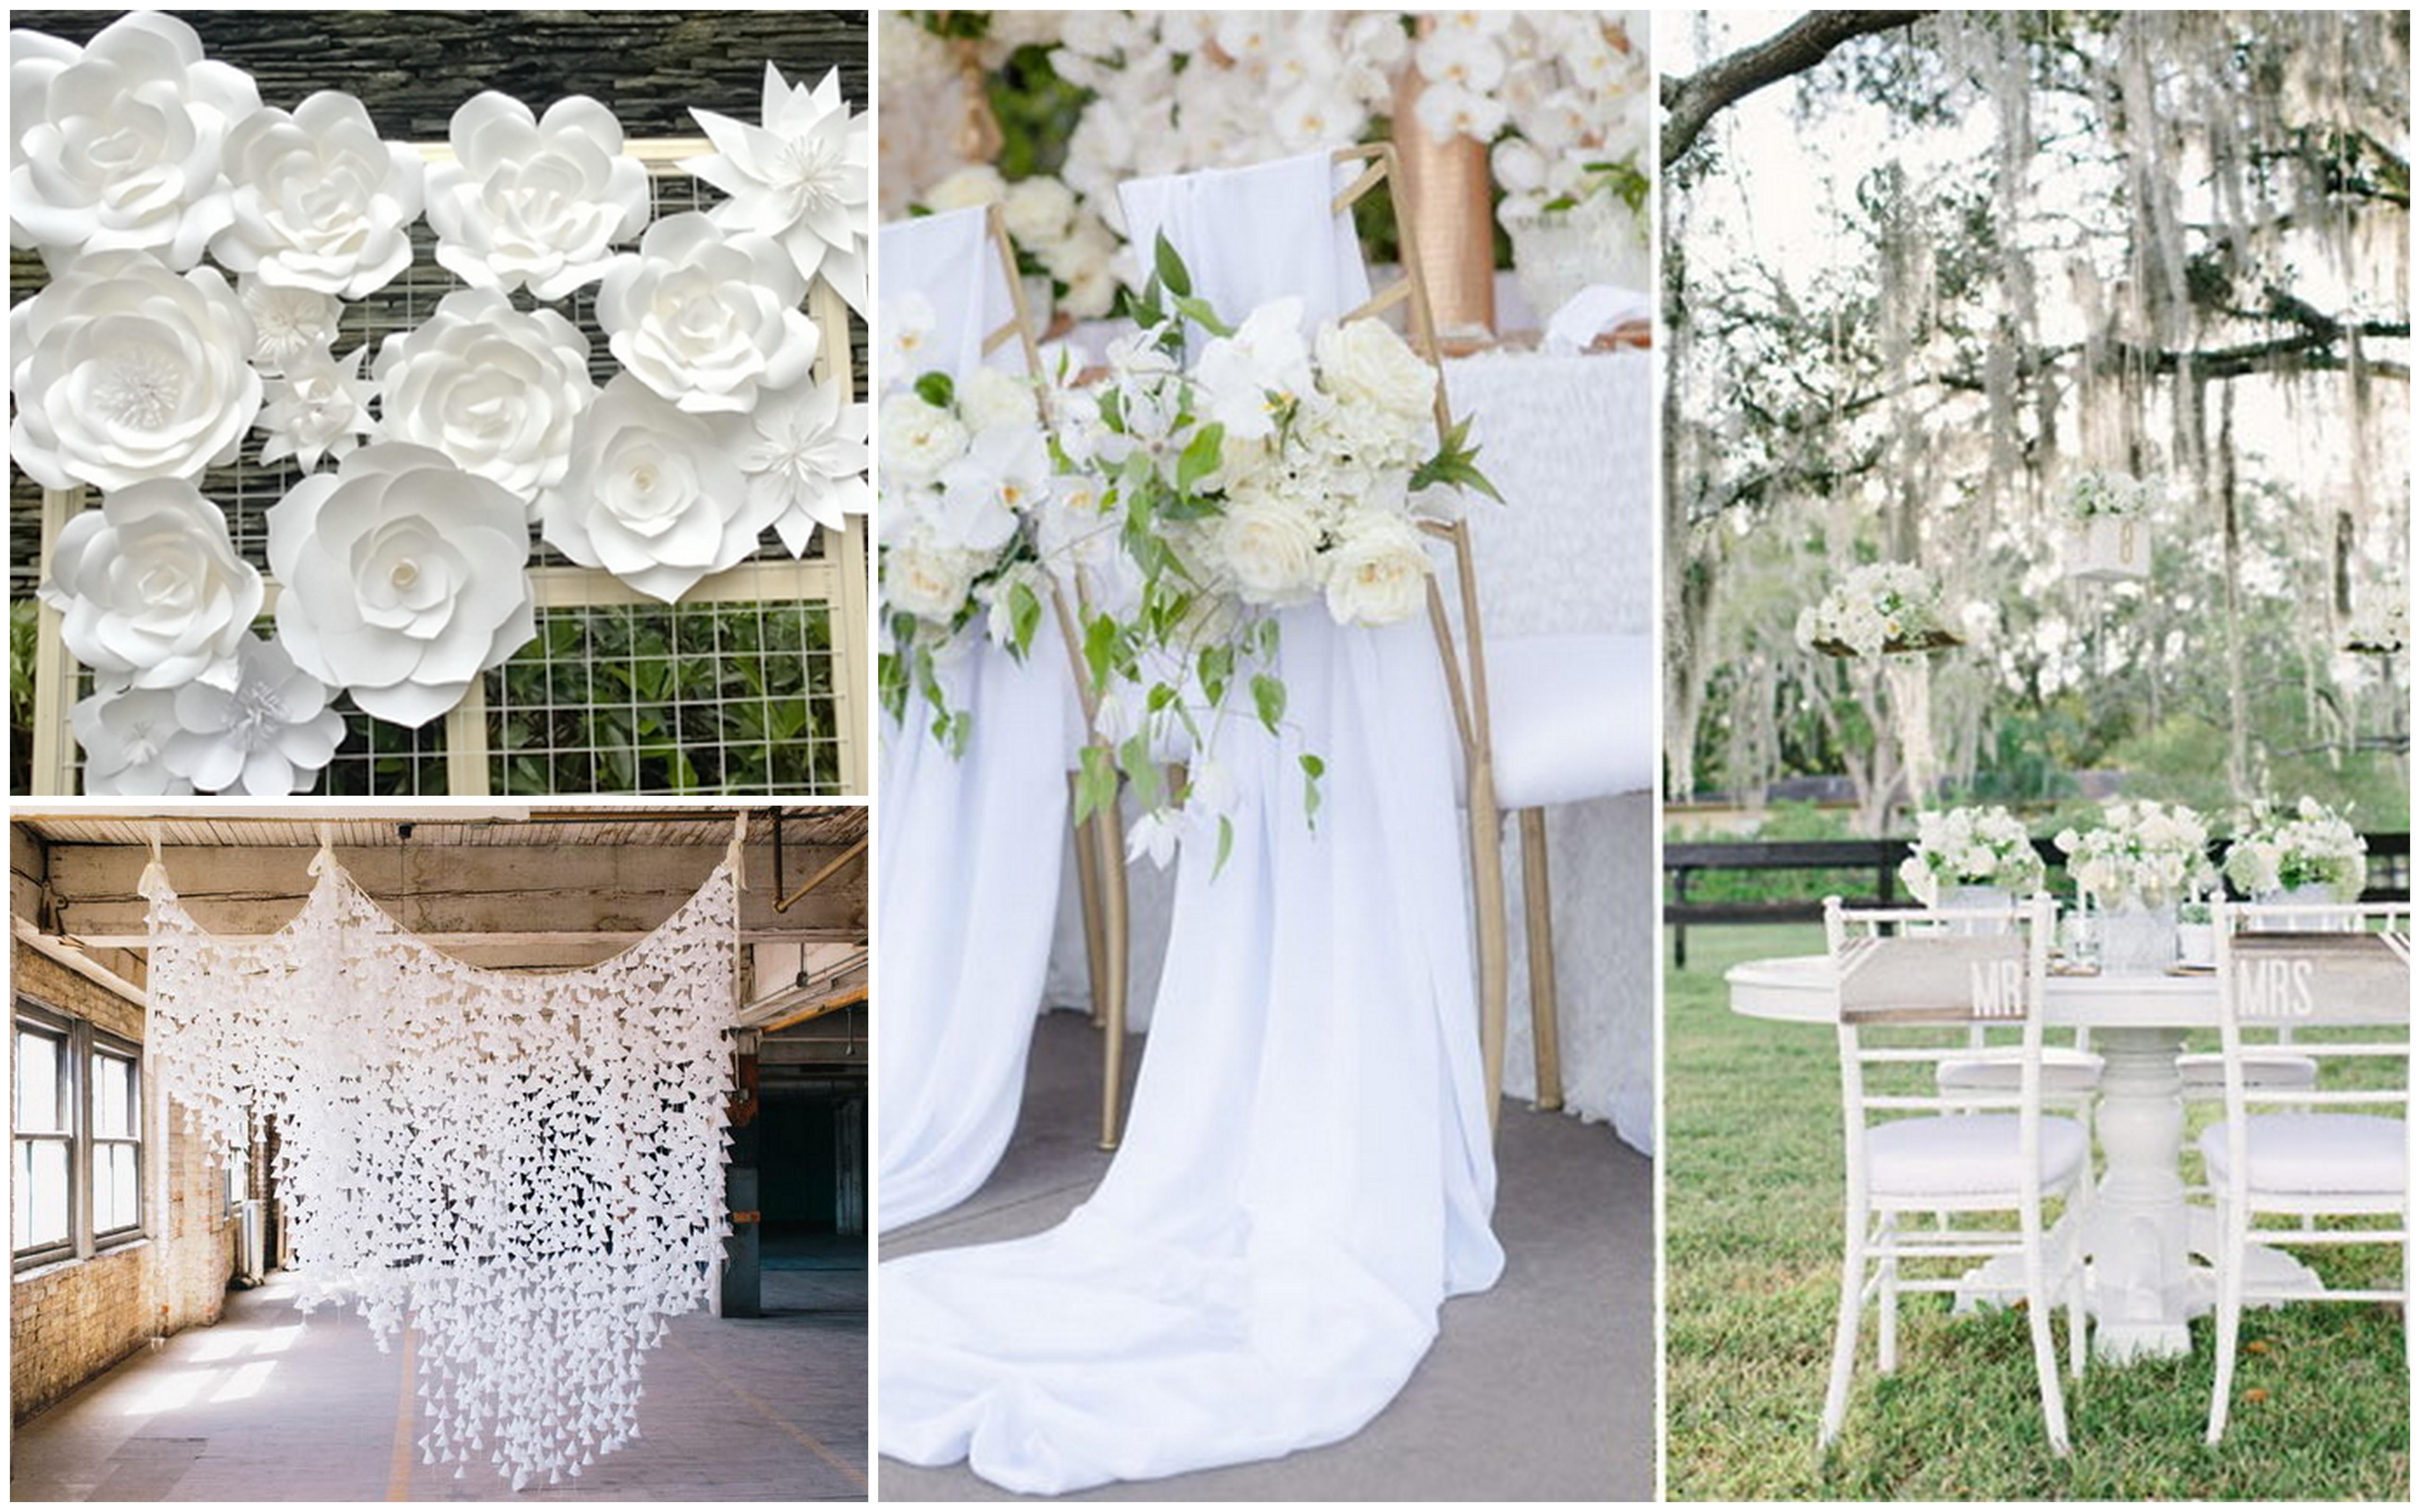 11 Pure White Theme Wedding Ideas and Inspirations for Romantic ...